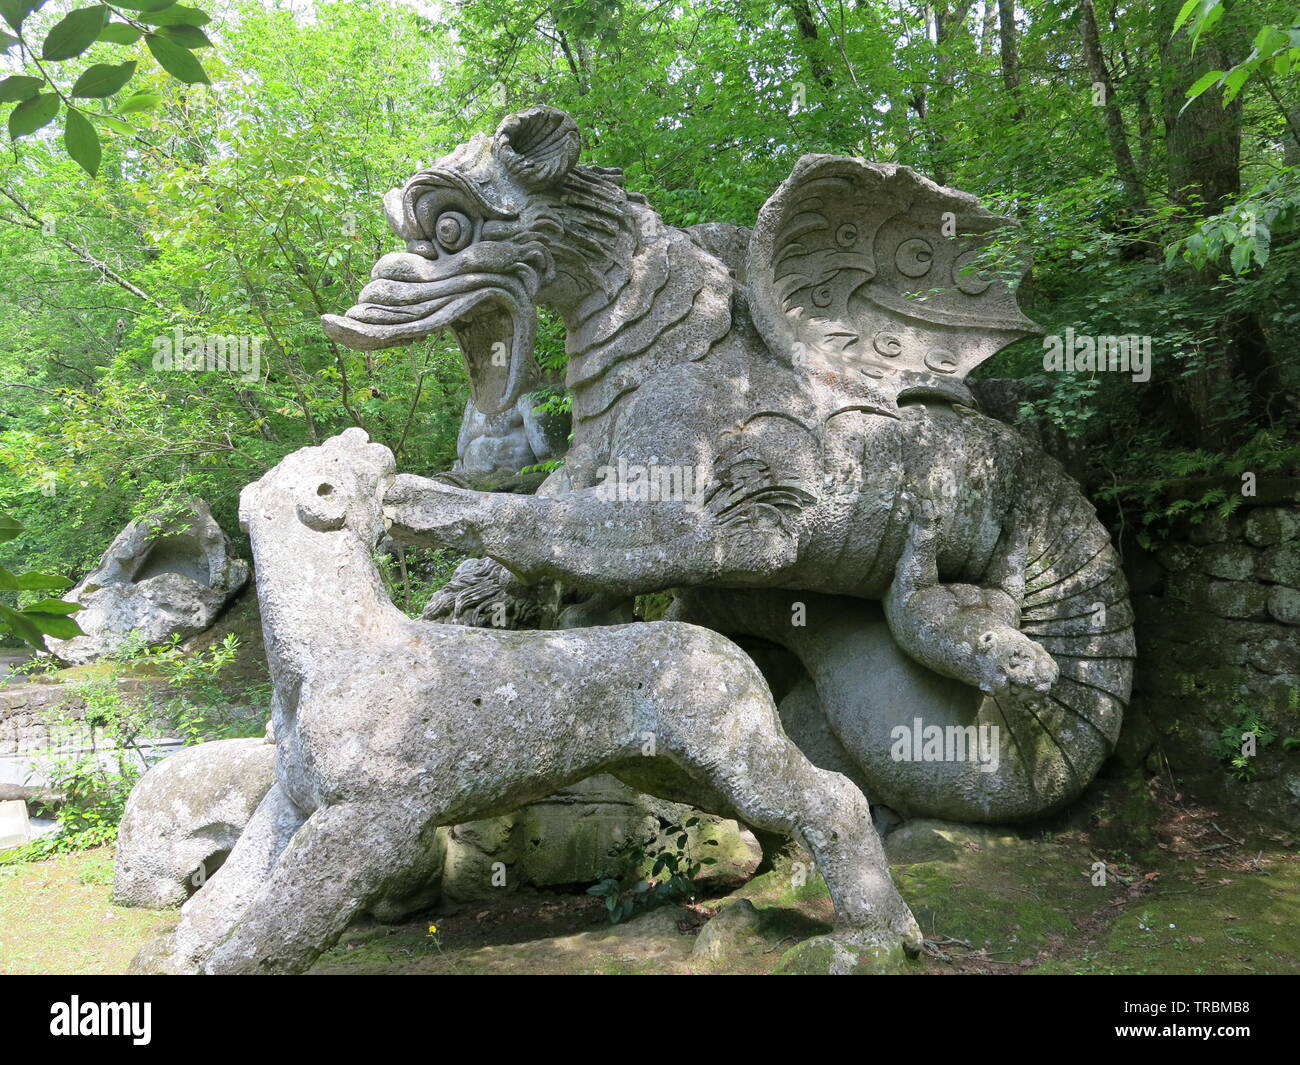 Mythological creatures are some of the giant stone sculptures at the eccentric Sacro Bosco Park near Bomarzo, central Italy Stock Photo